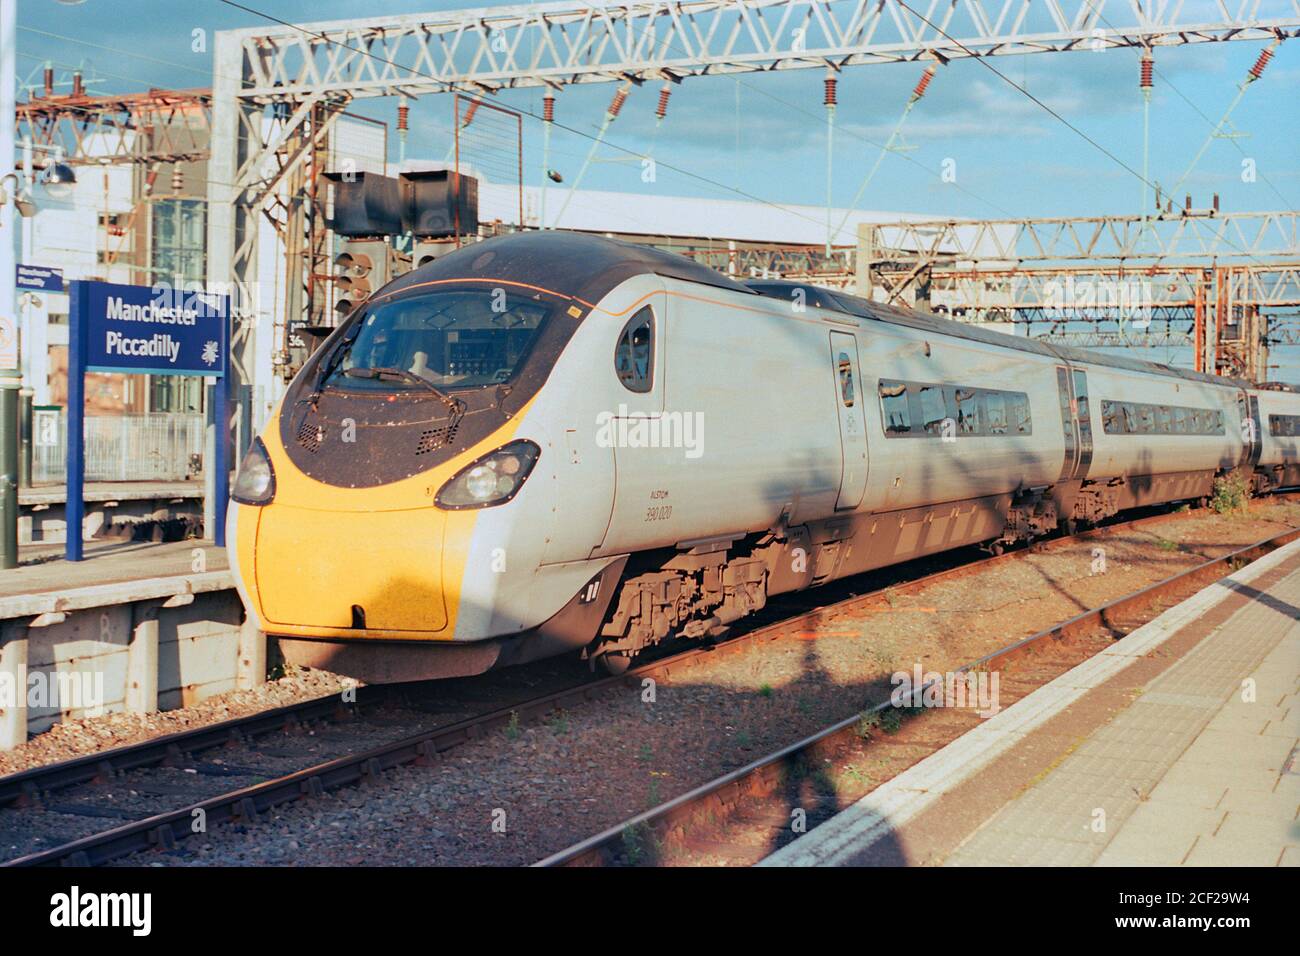 Manchester, UK - 1 September 2020: A electric high-speed train (Class 390) operating by Avanti West Coast at Manchester Piccadilly station. Stock Photo